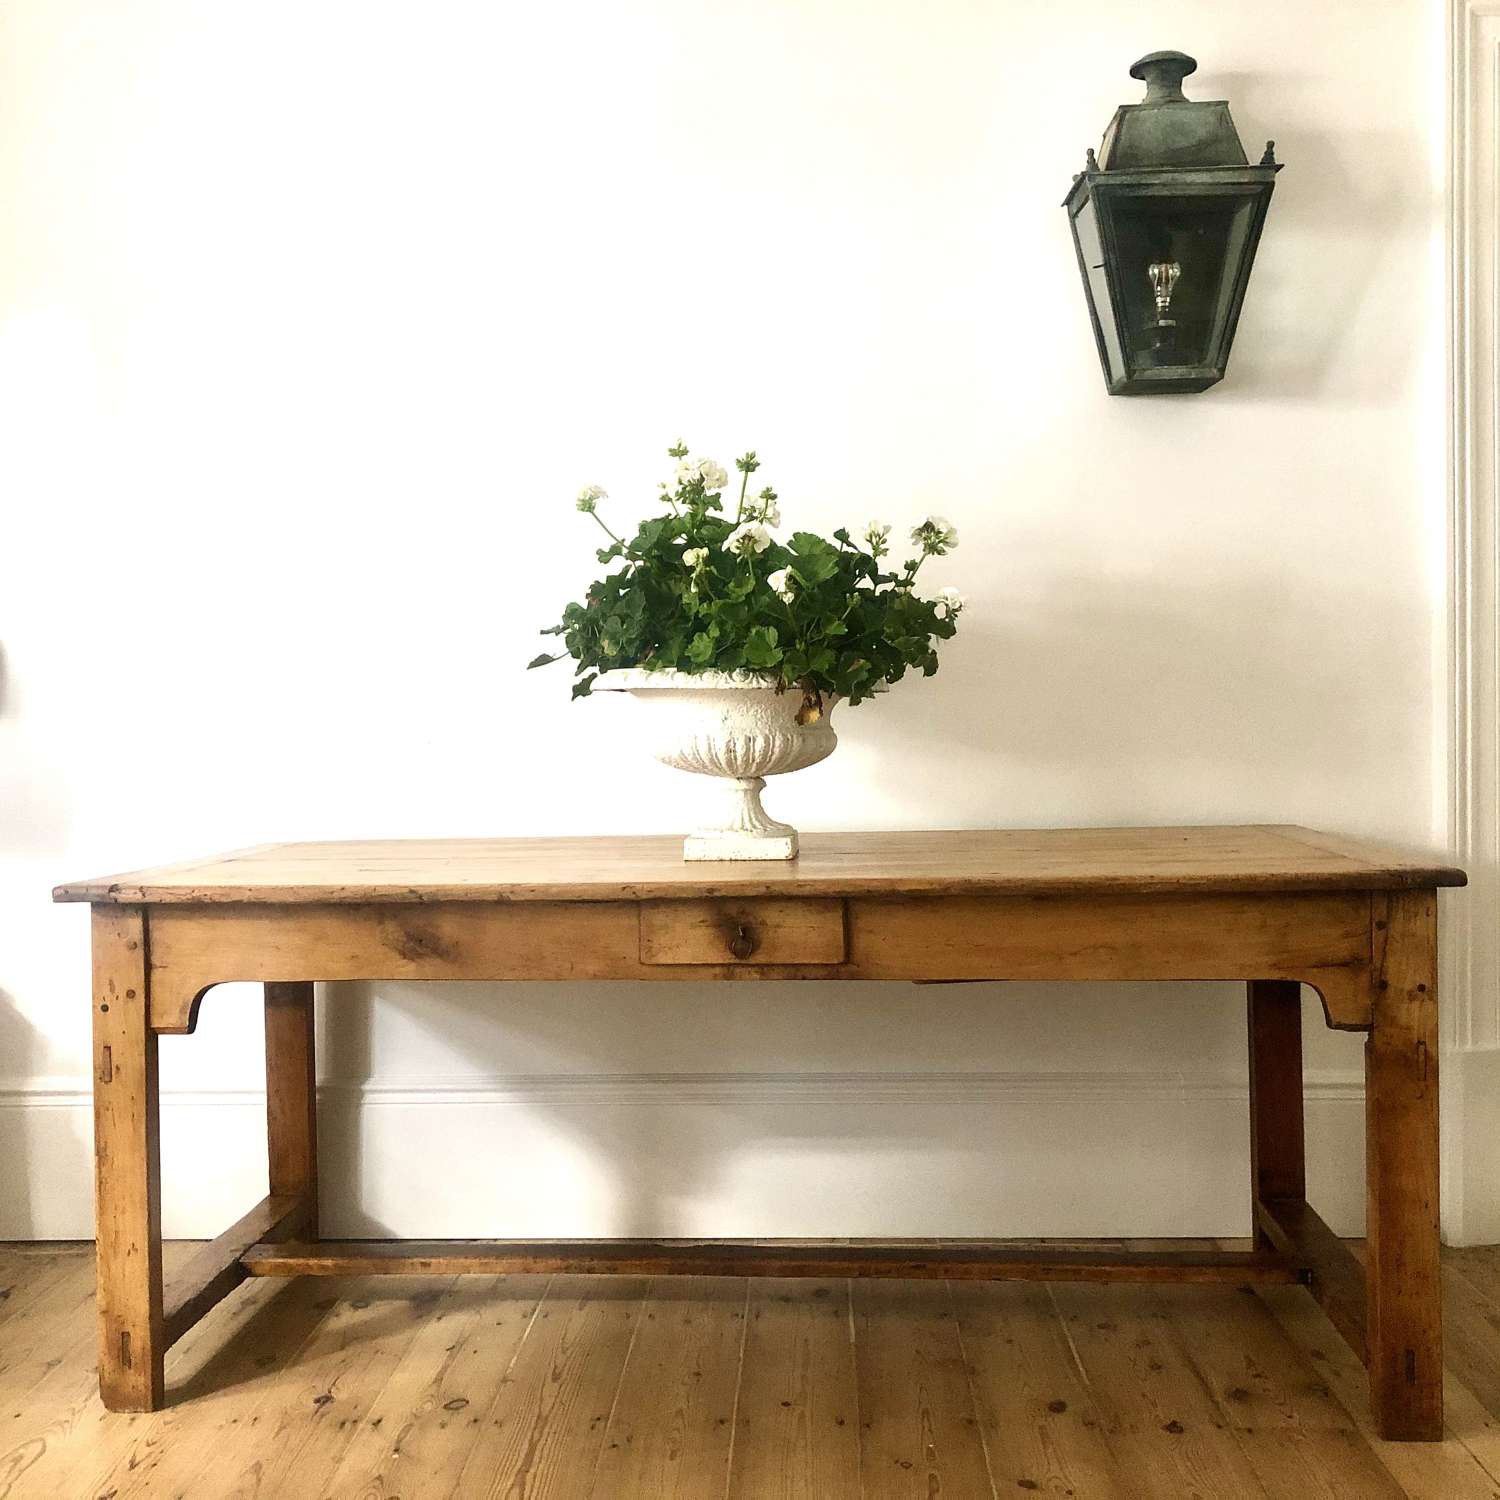 19th century antique French farmhouse refectory table